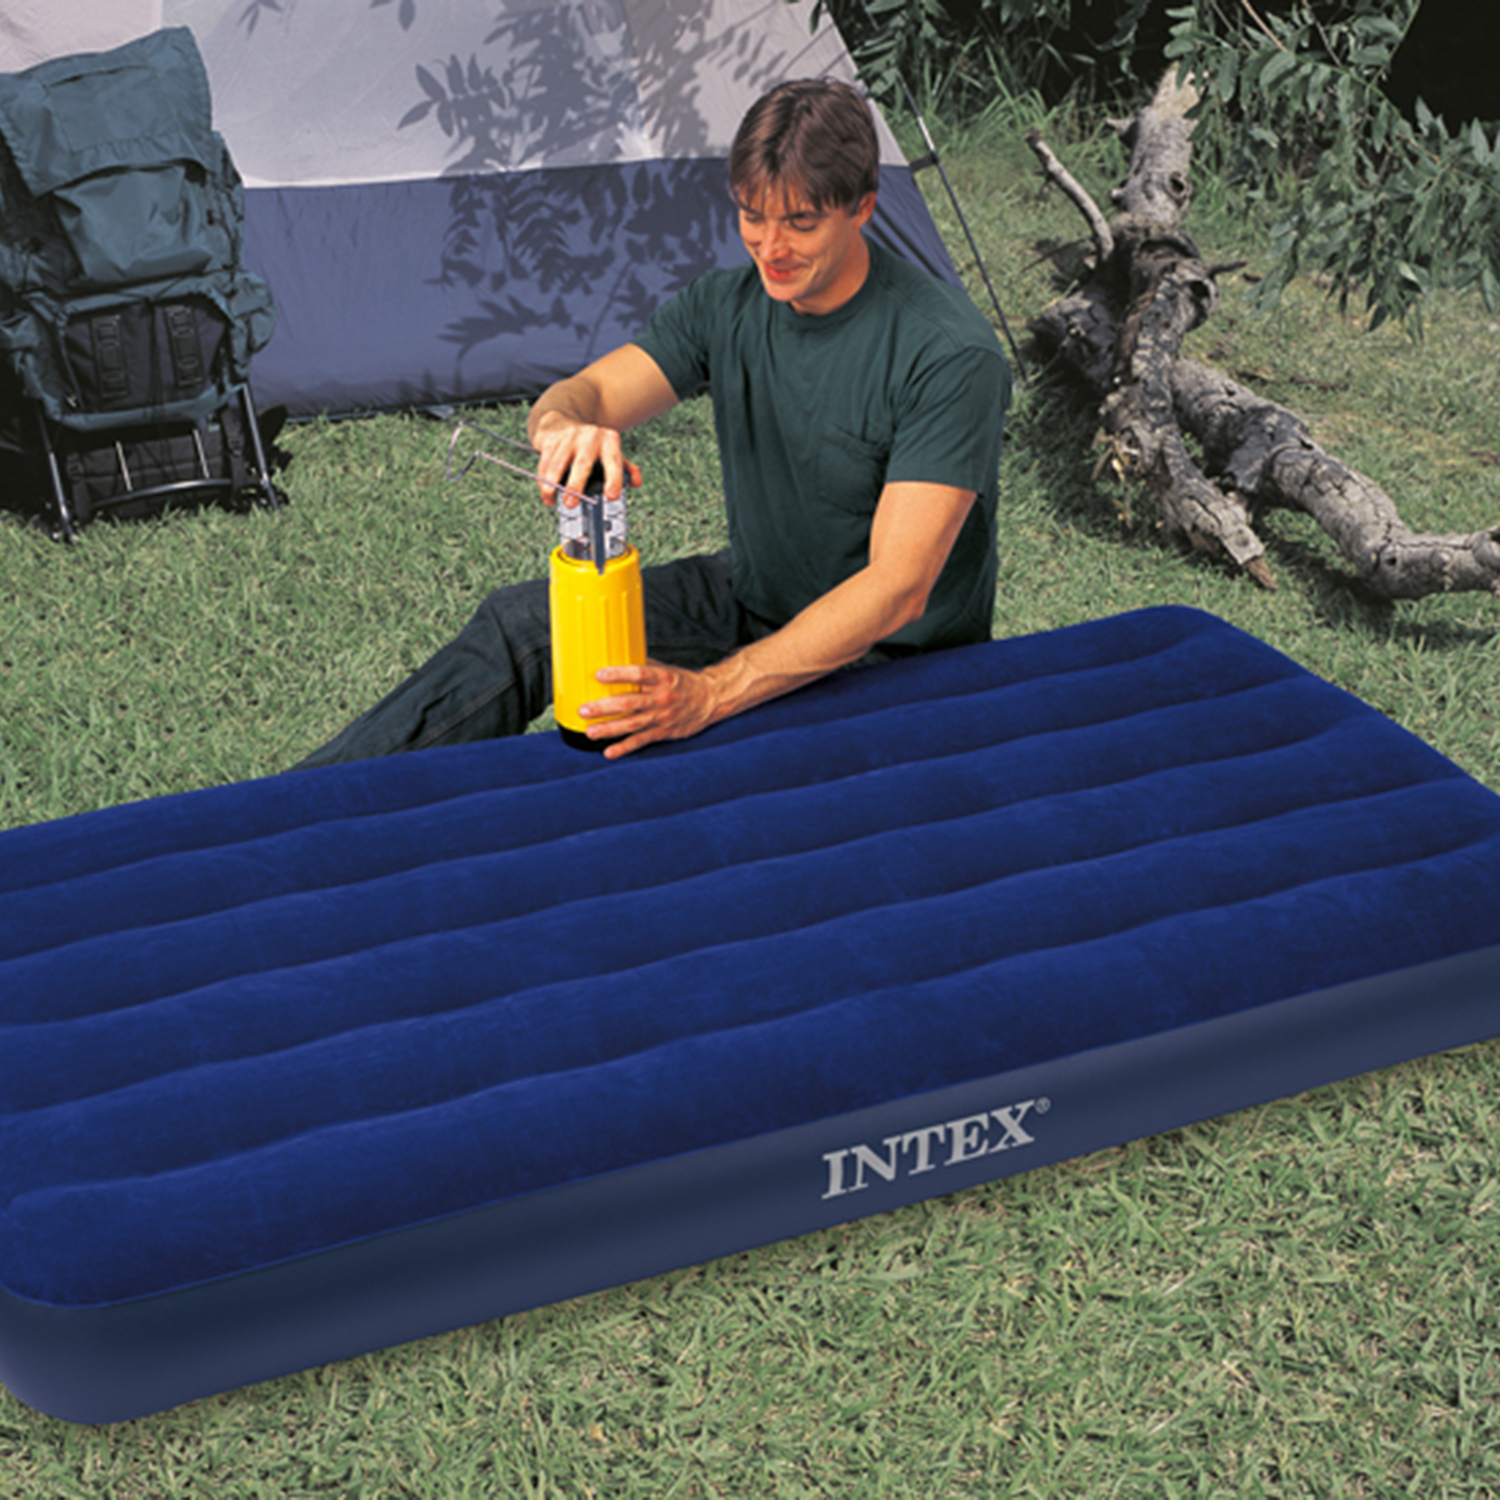 Intex 8.75" Classic Downy Inflatable Airbed Mattress, Twin - image 6 of 6